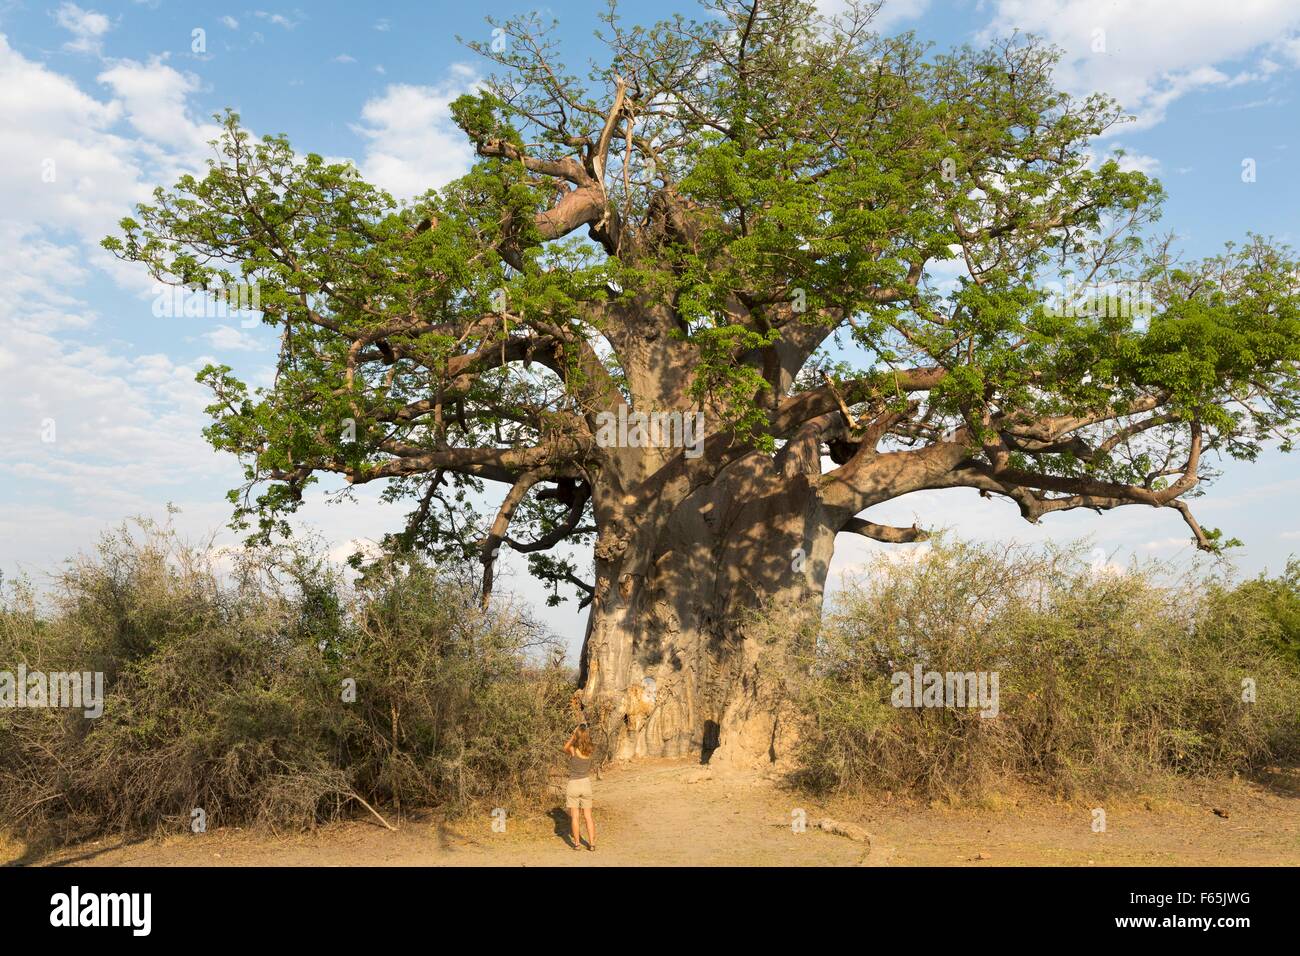 A man under a giant baobab tree in the Bwabwata National Park in Caprivi, Namibia Stock Photo